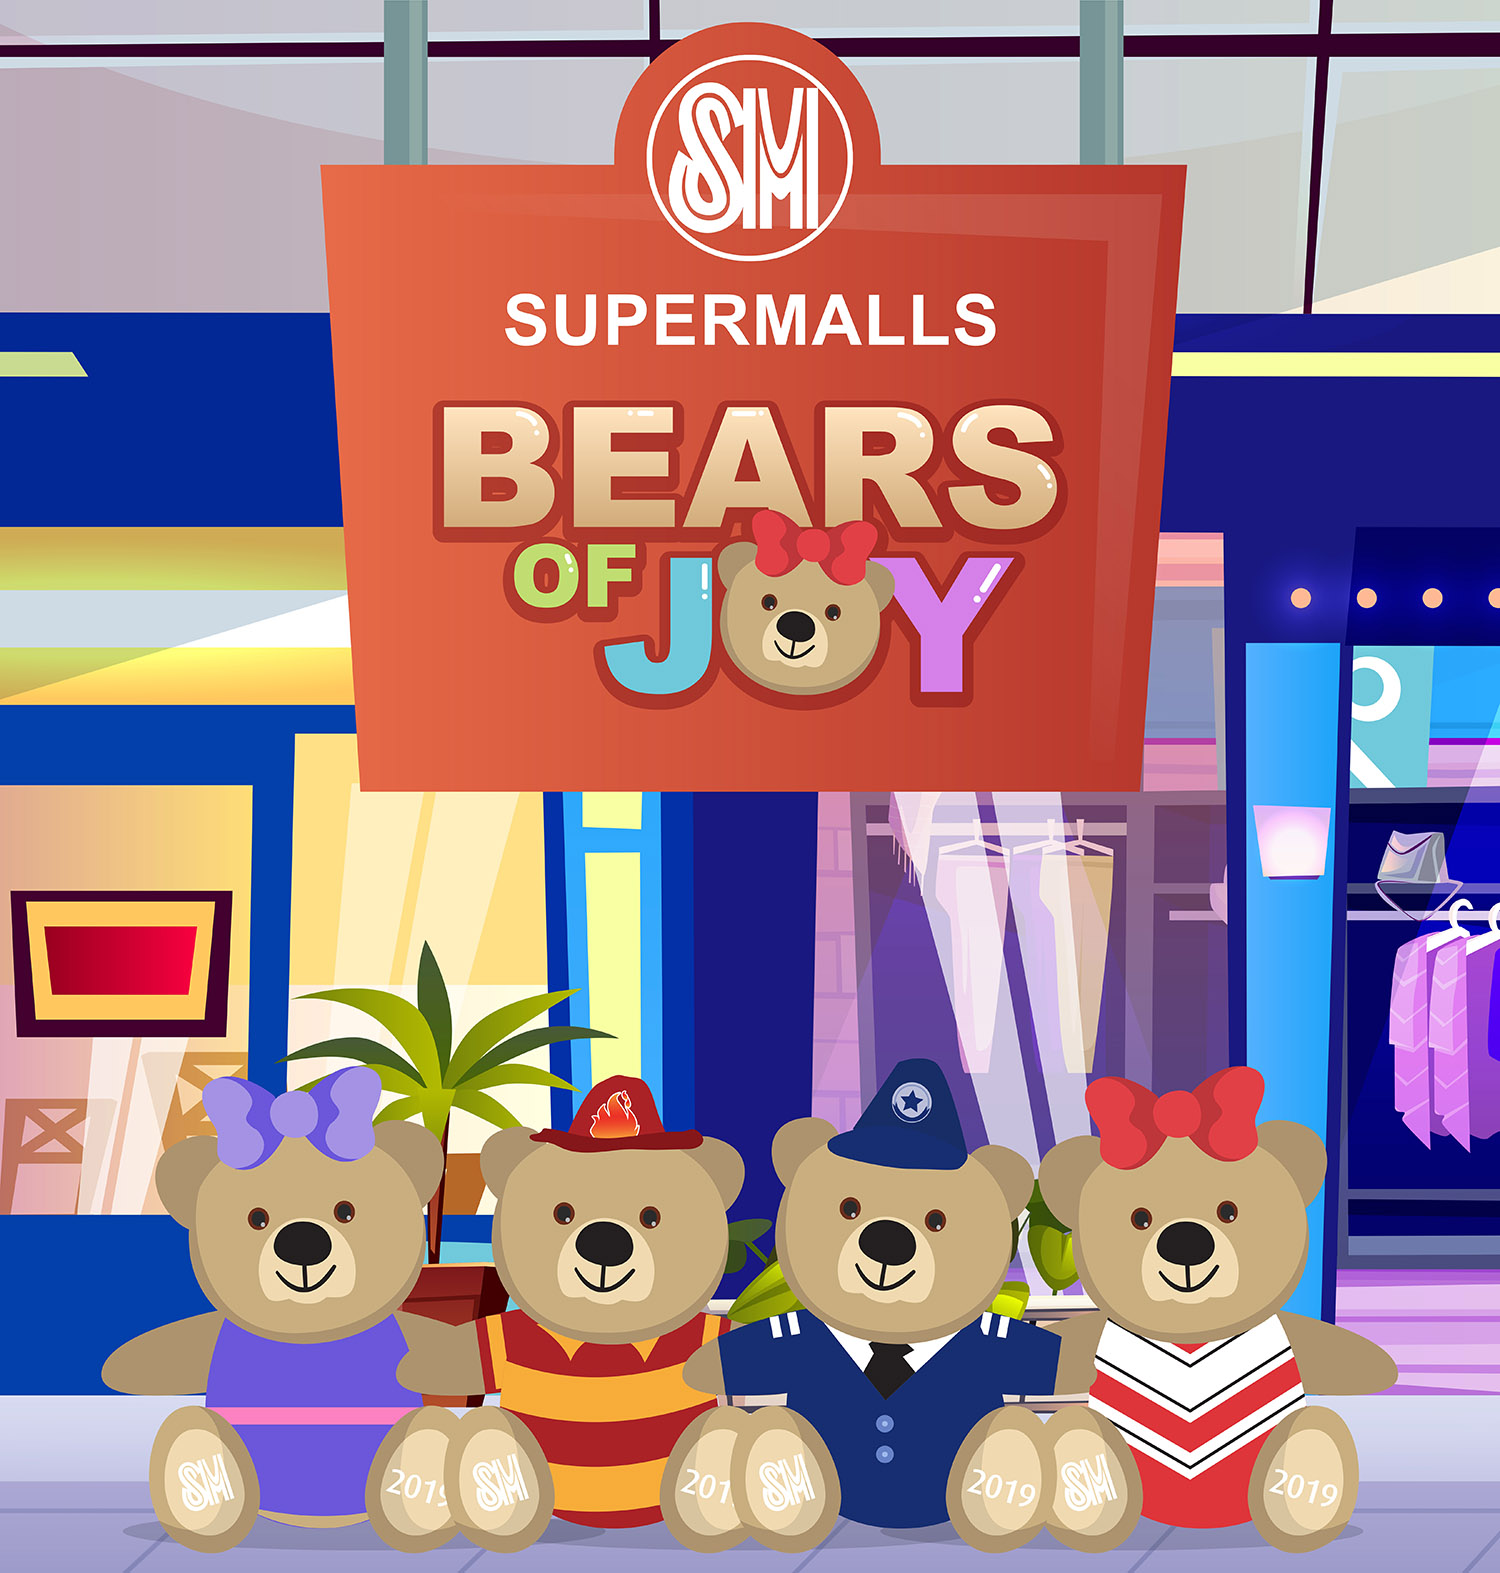 The SM Bears of Joy are out to play this Christmas!